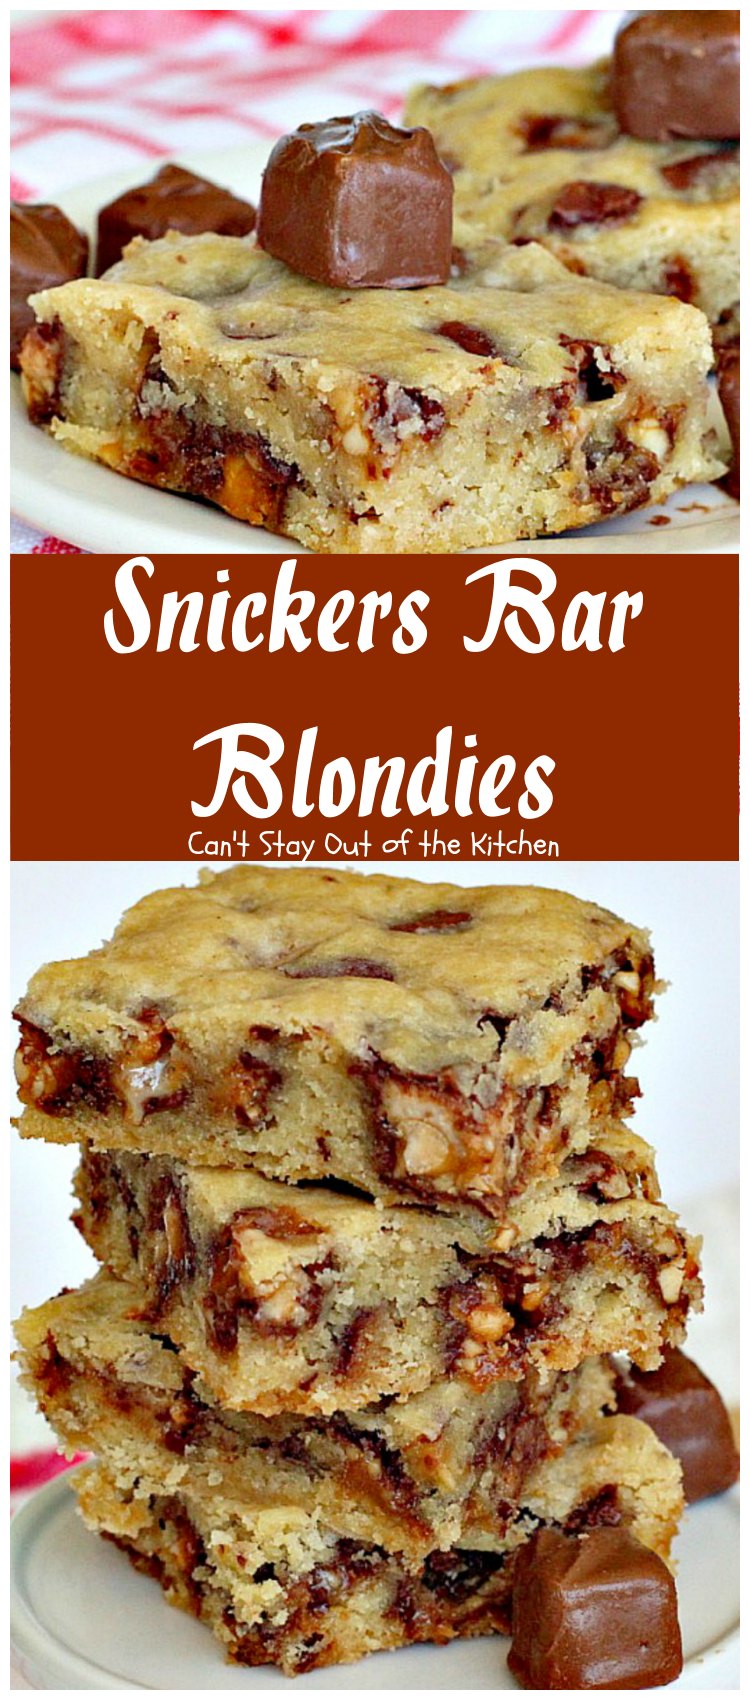 Snickers Bar Blondies | Can't Stay Out of the Kitchen | these fabulous #brownies are filled with #SnickersBars. They're great for #tailgating parties or as a way to use up leftover #halloween candy! #dessert #cookie #chocolate 